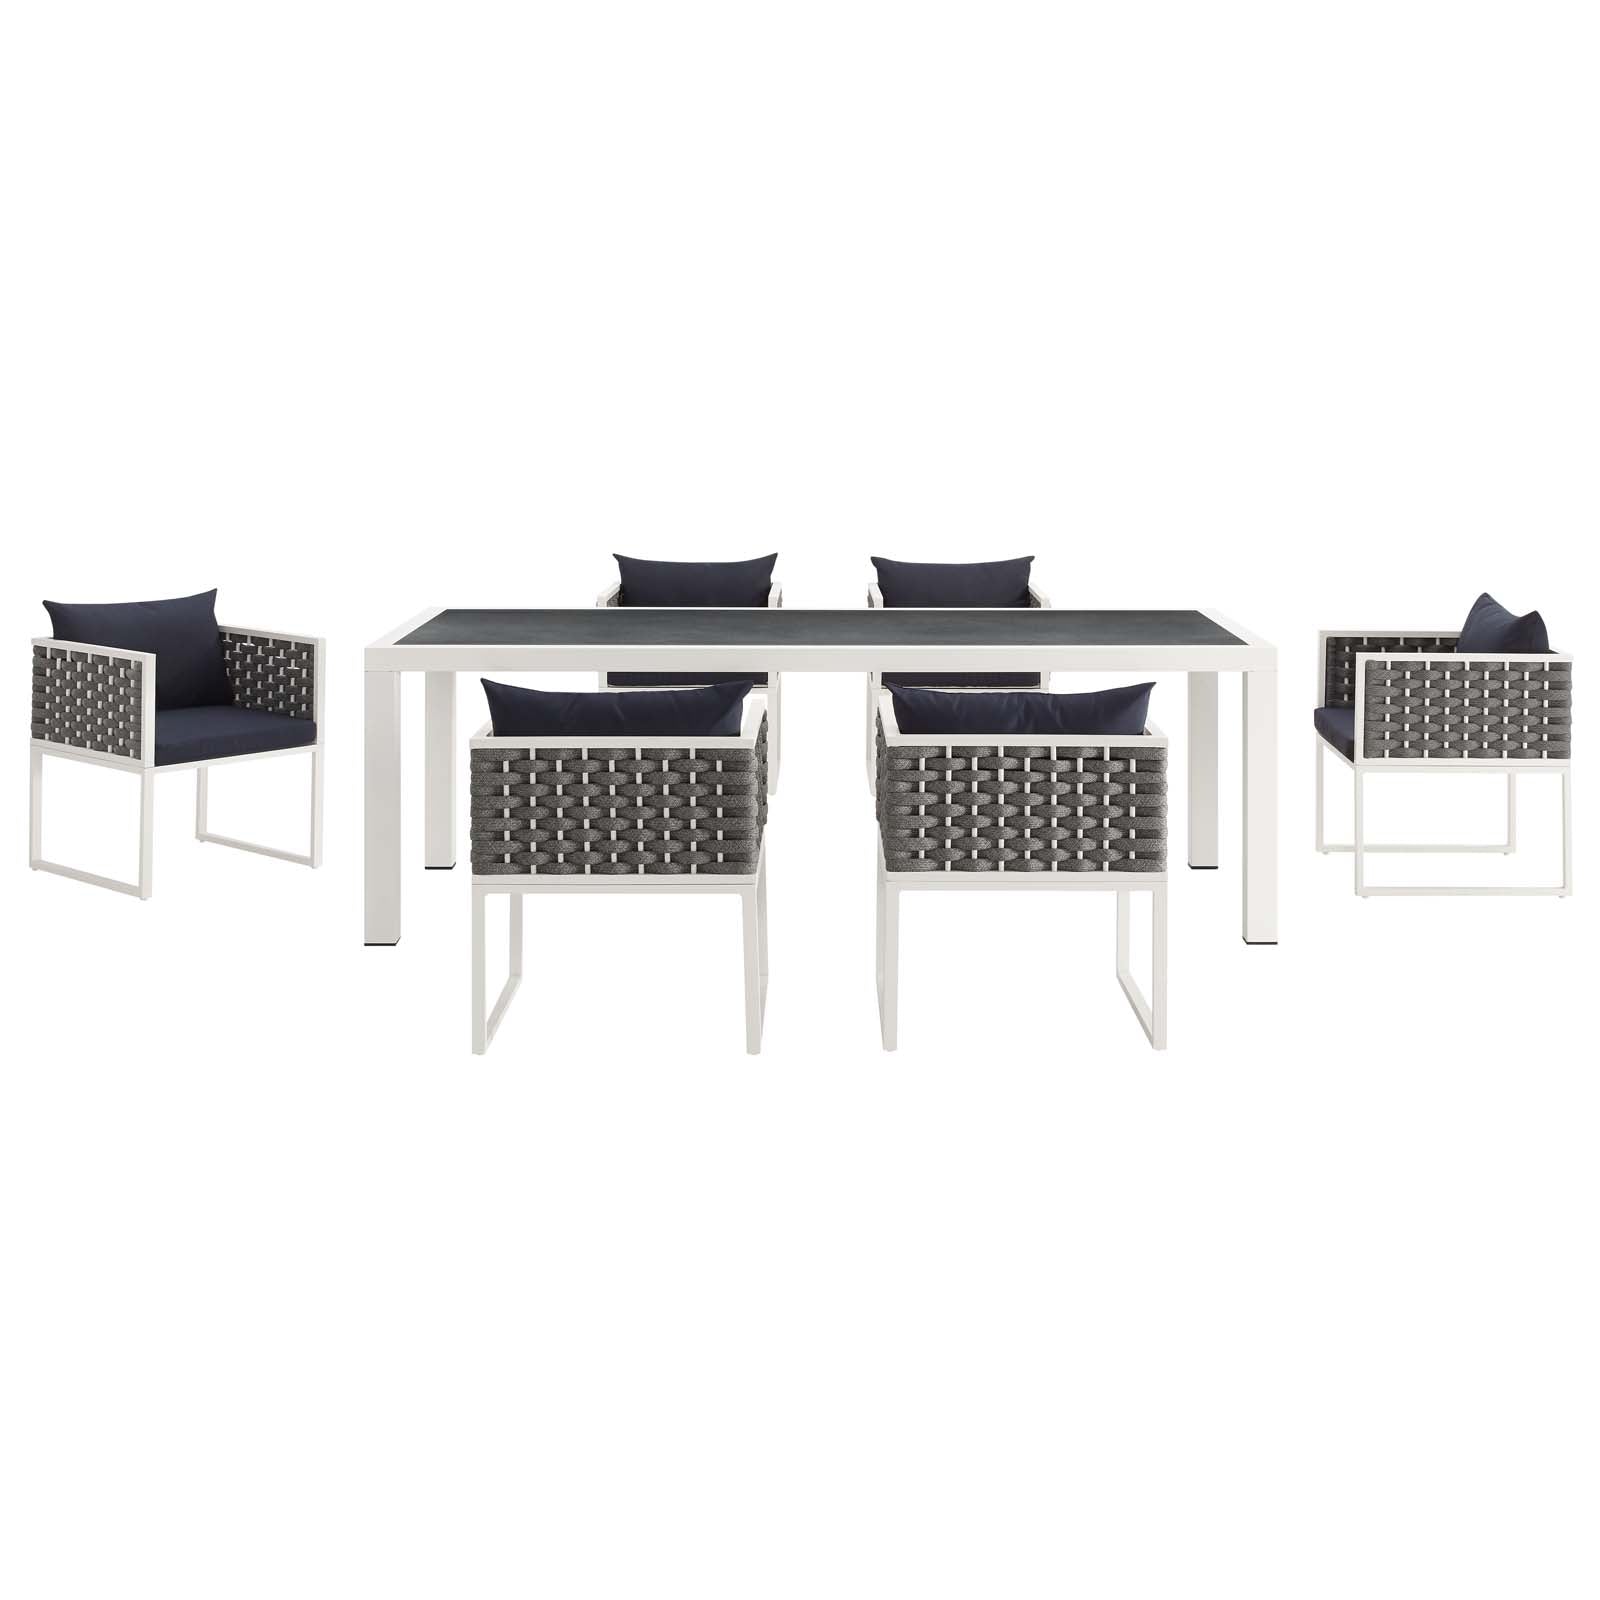 Stance 7 Piece Outdoor Patio Aluminum Dining Set-Outdoor Dining Set-Modway-Wall2Wall Furnishings